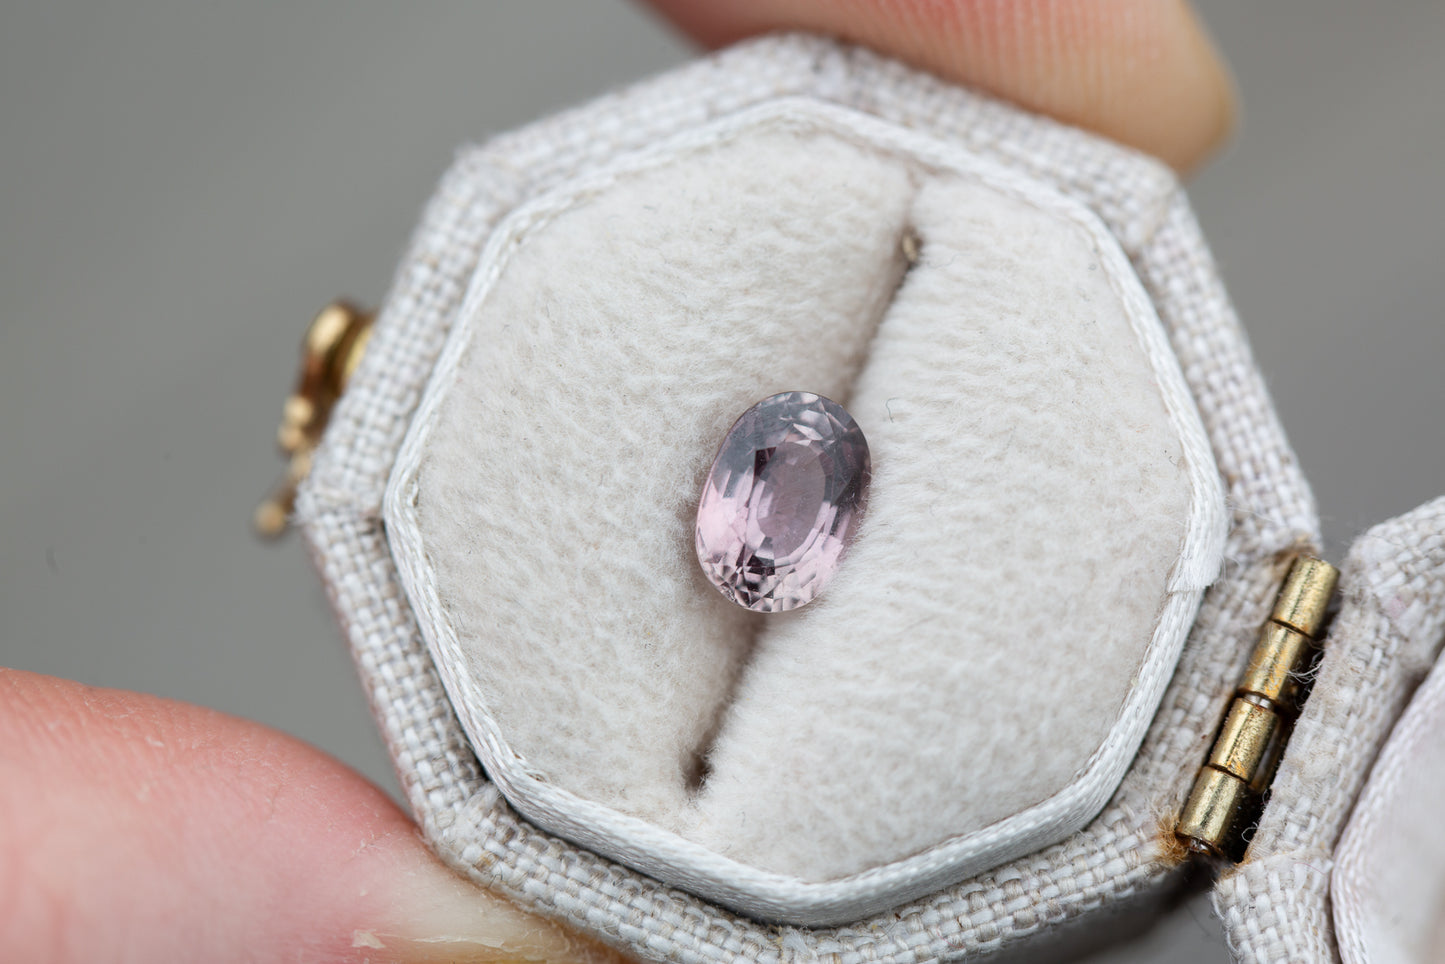 Load image into Gallery viewer, 1.19ct oval mauve pink sapphire
